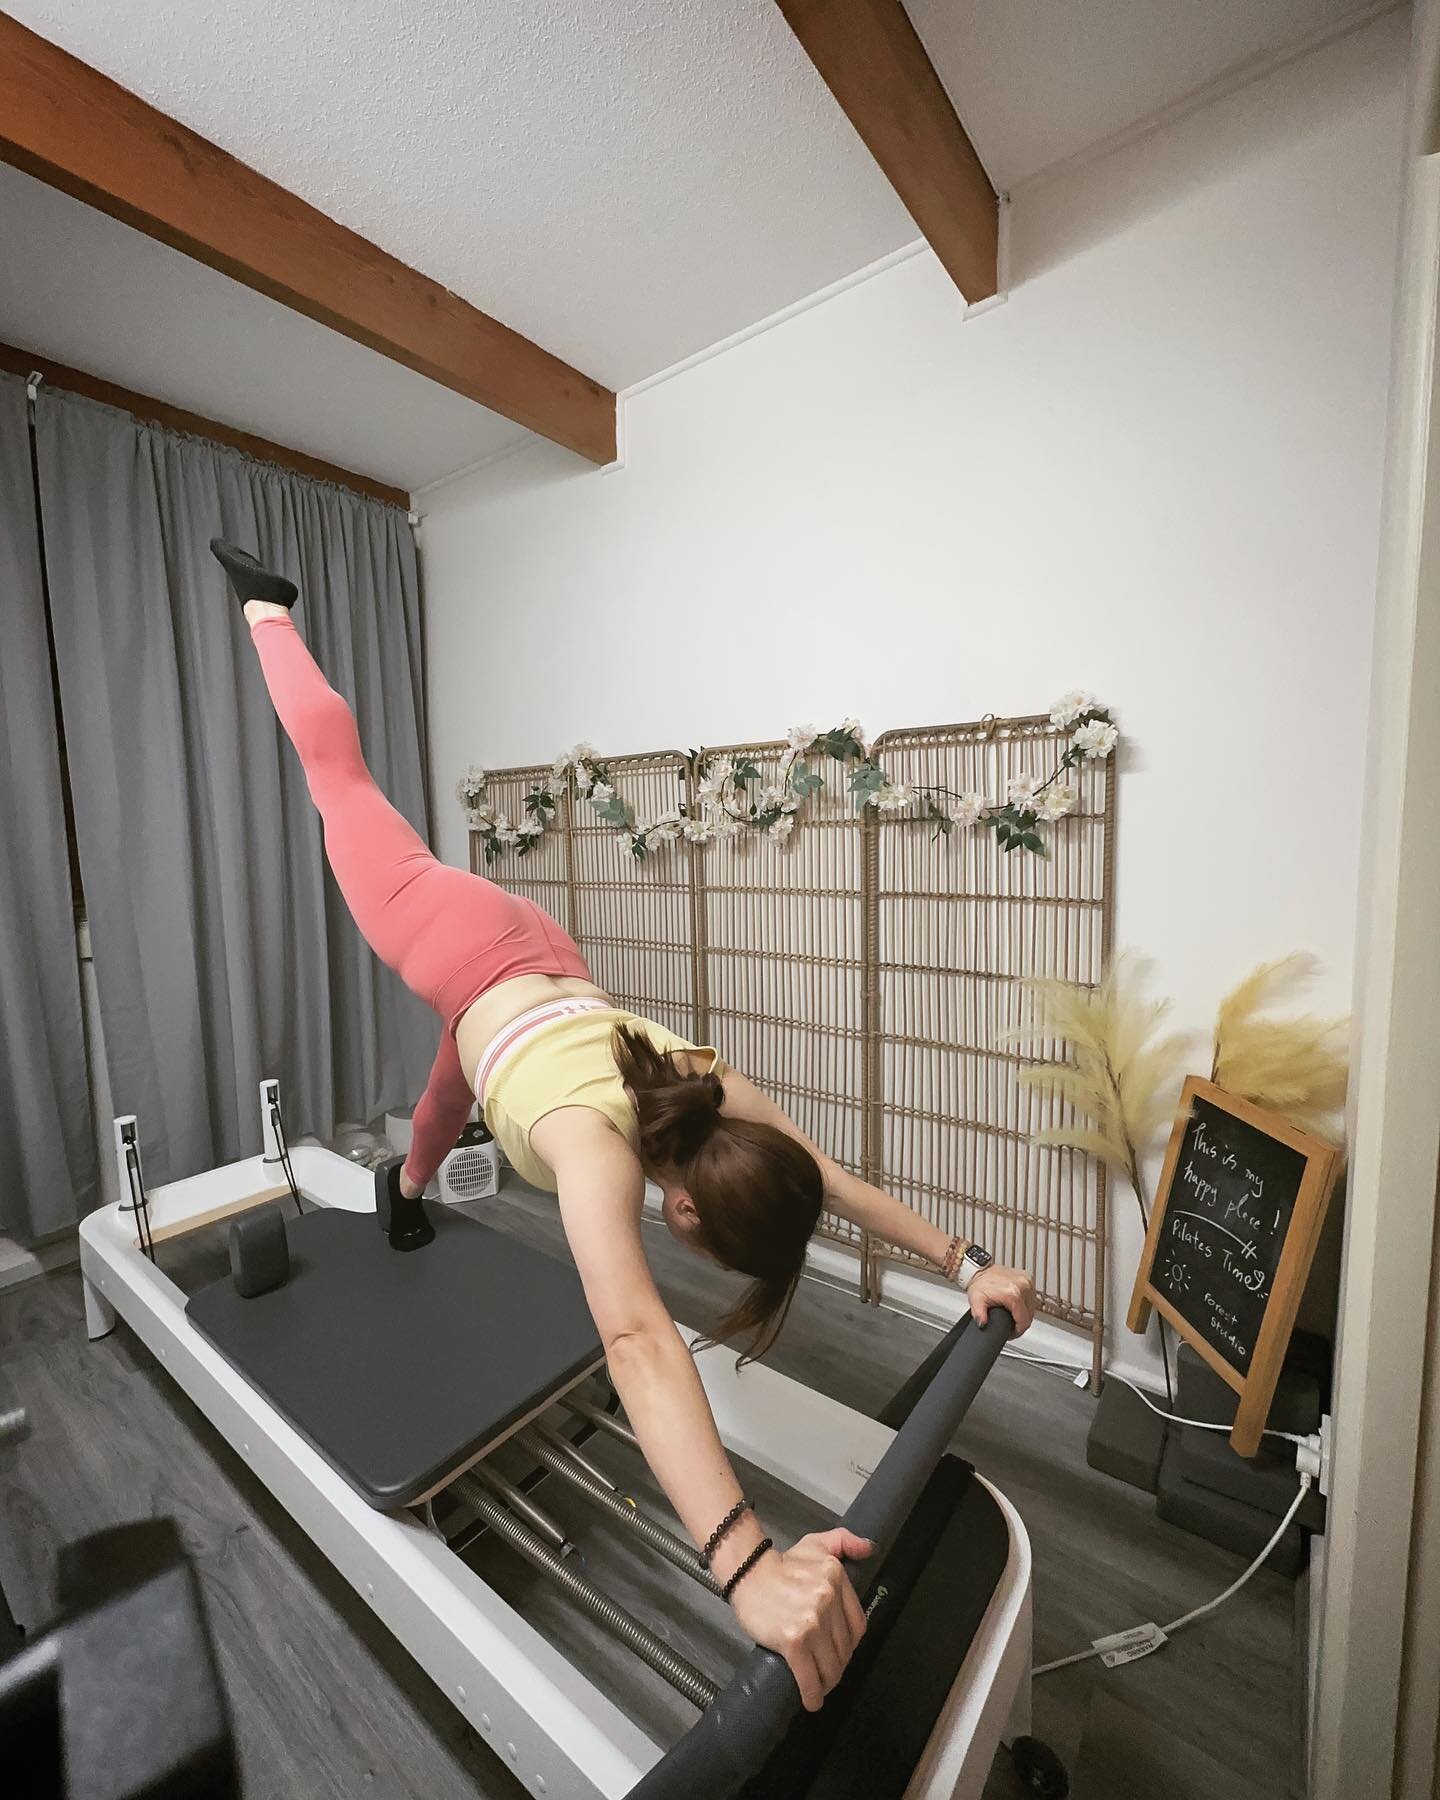 Breath, balance, and core strength&mdash;the pillars of a transformative Pilates practice. Engage your core, the powerhouse within, for stability and fluid movement. Embrace these foundations to unlock your body's true potential. #PilatesJourney #Min